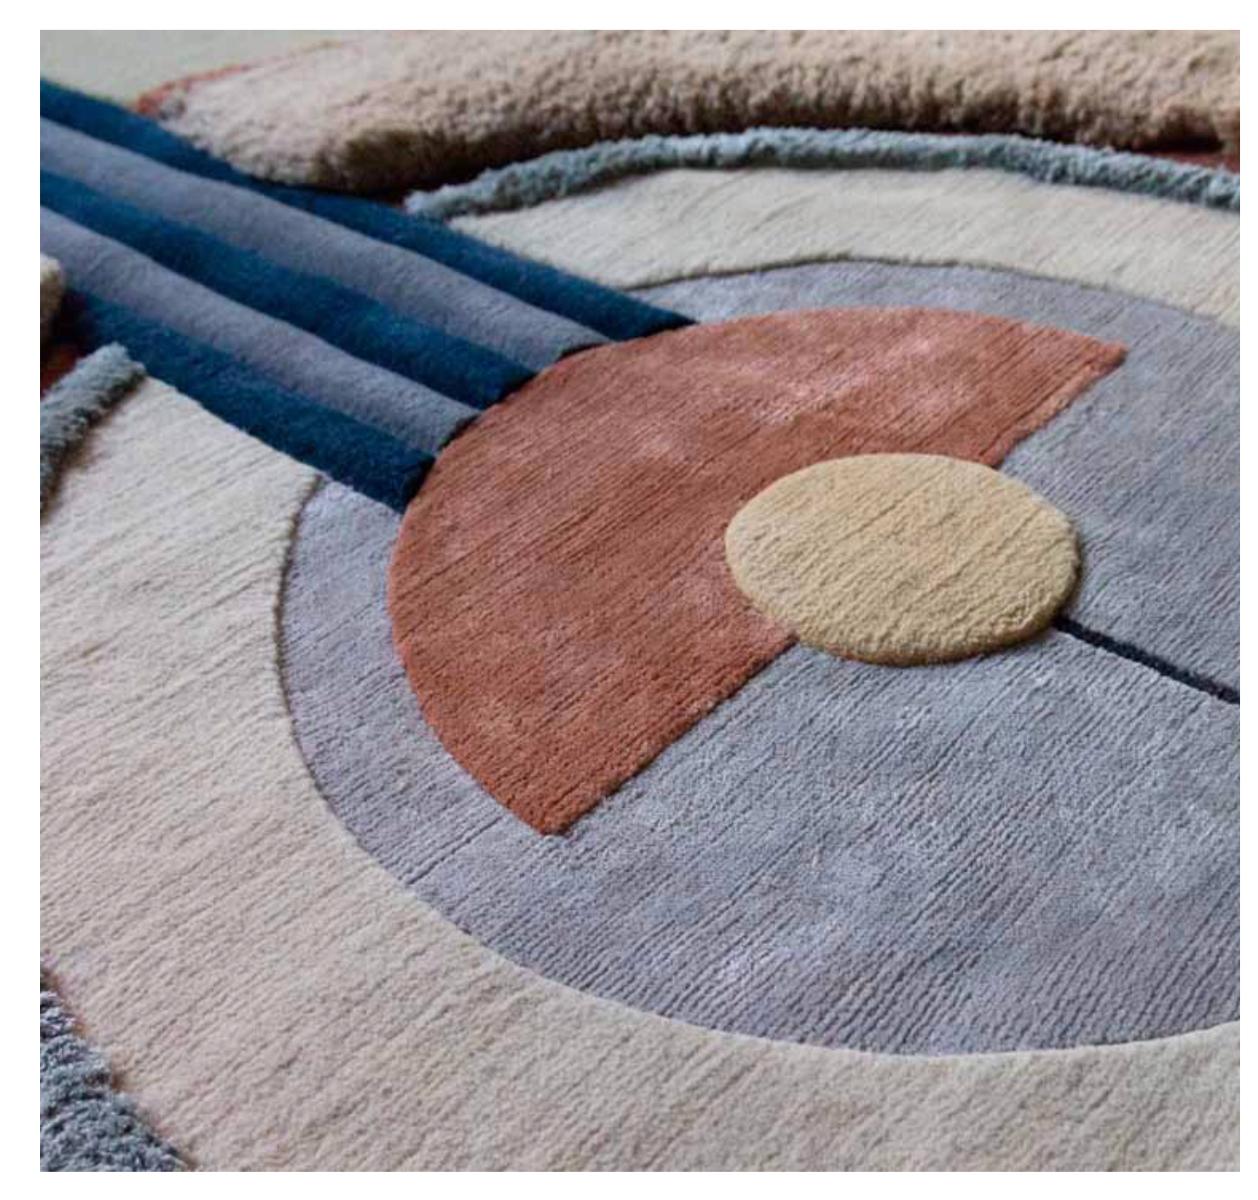 Ultimate Bliss rug designed by Mae Engelgeer as part of a rare presentation of unseen bespoke rugs developed and presented exclusively for the Biennale Interieur 2018. 

Presented in an experimental space creating a contemporary narrative between